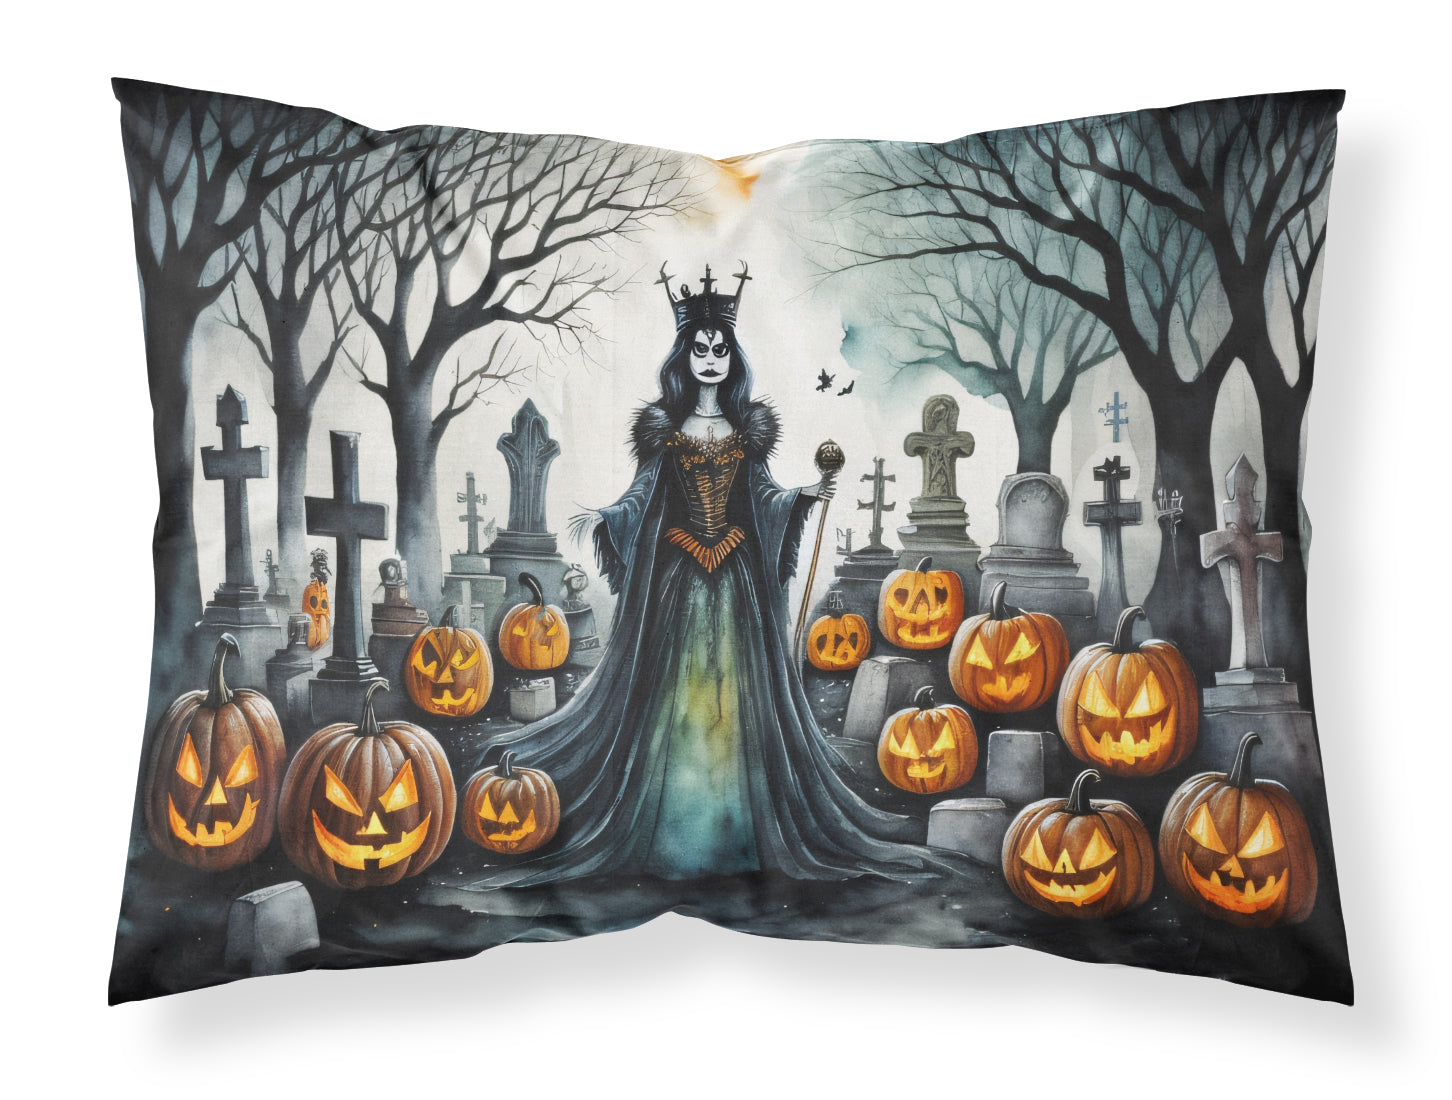 Buy this Evil Queen Spooky Halloween Fabric Standard Pillowcase